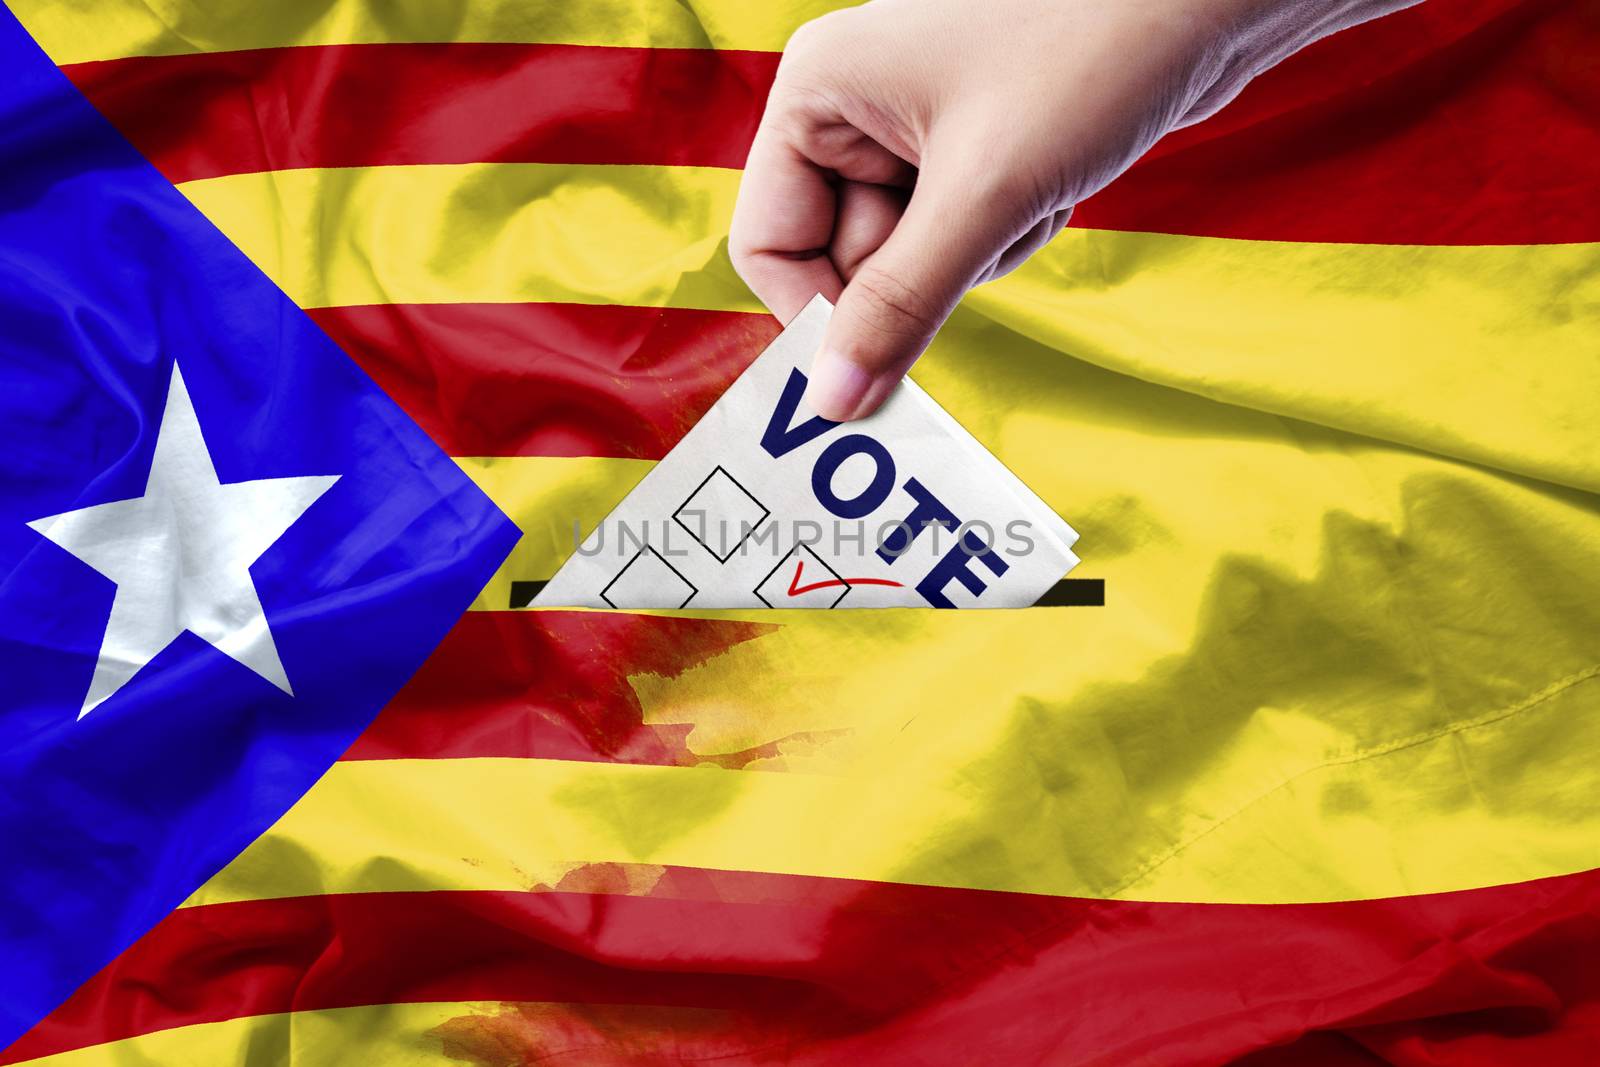 Vote referendum for Catalonia independence exit national crisis separatism risk : close up hand of a person casting a ballot at elections during voting on canvas Spain and Catalan flag background. by asiandelight